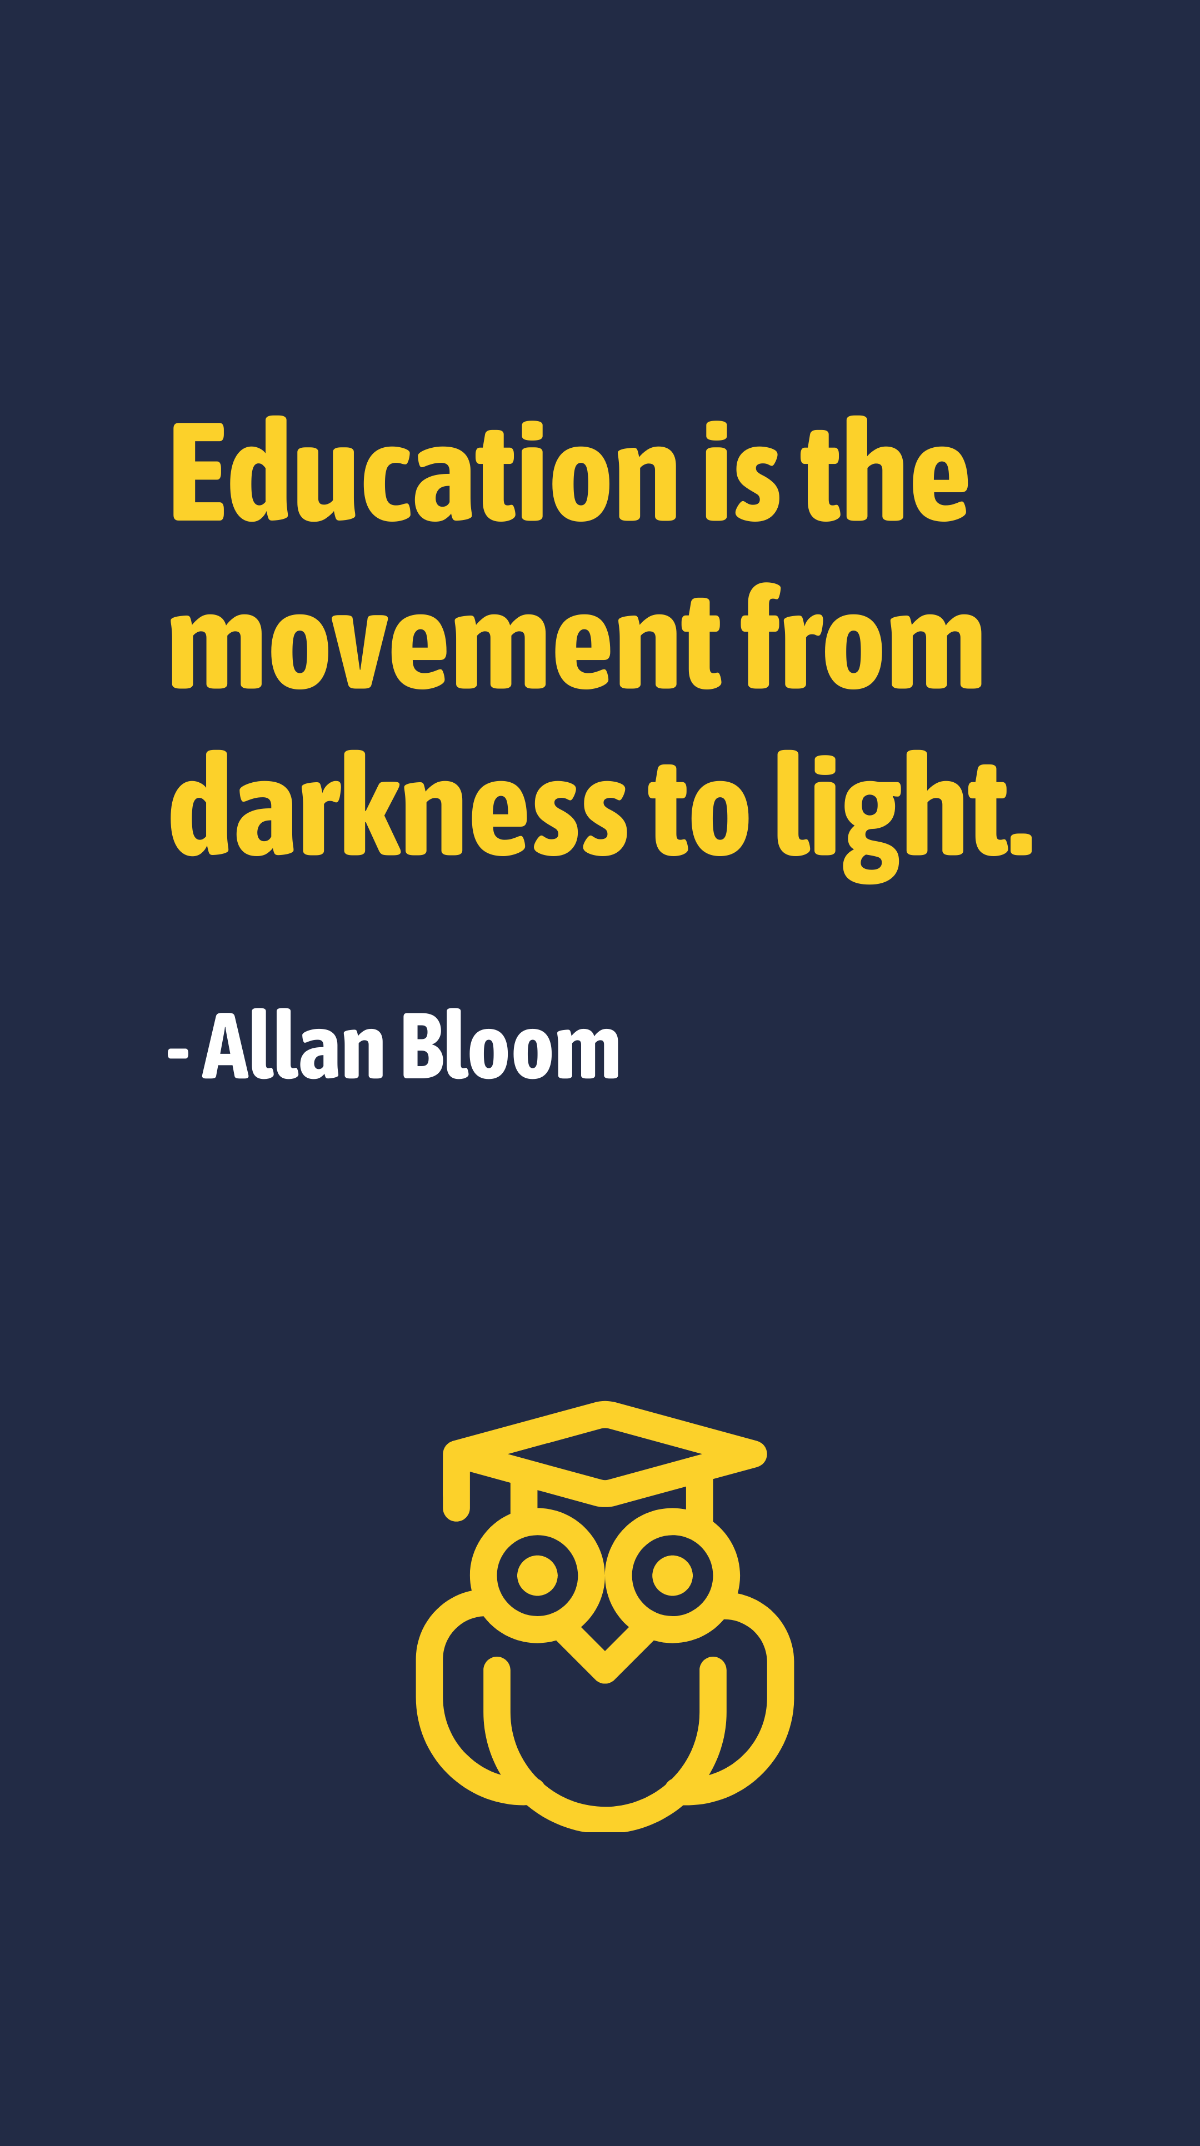 Allan Bloom - Education is the movement from darkness to light. Template